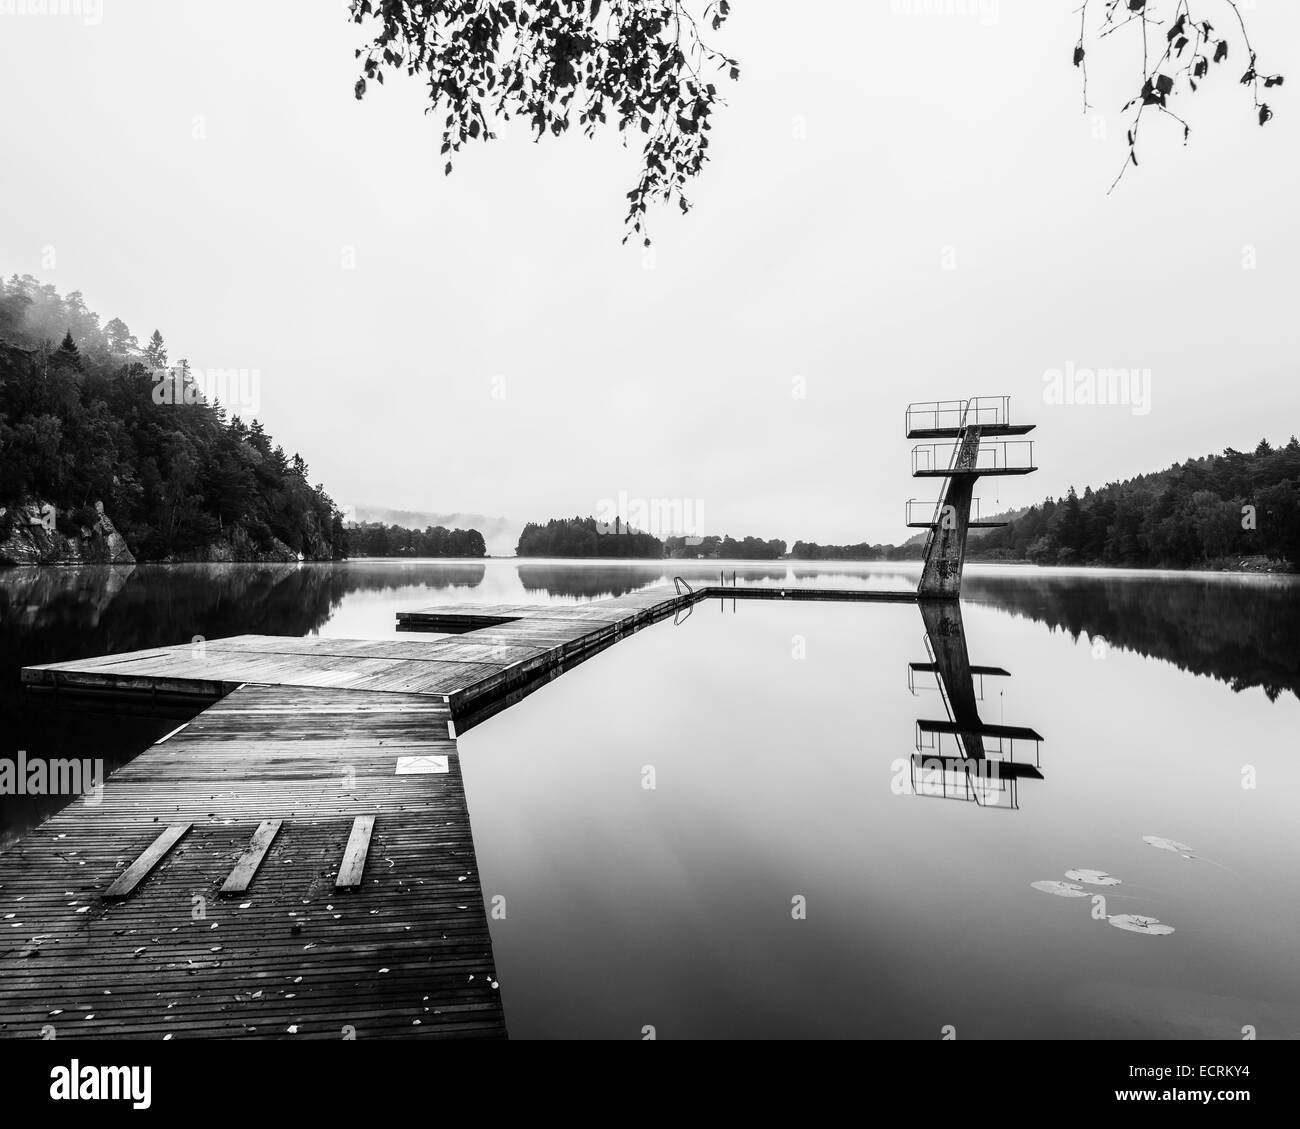 Wooden dock and diving boards on a tranquil lake Stock Photo